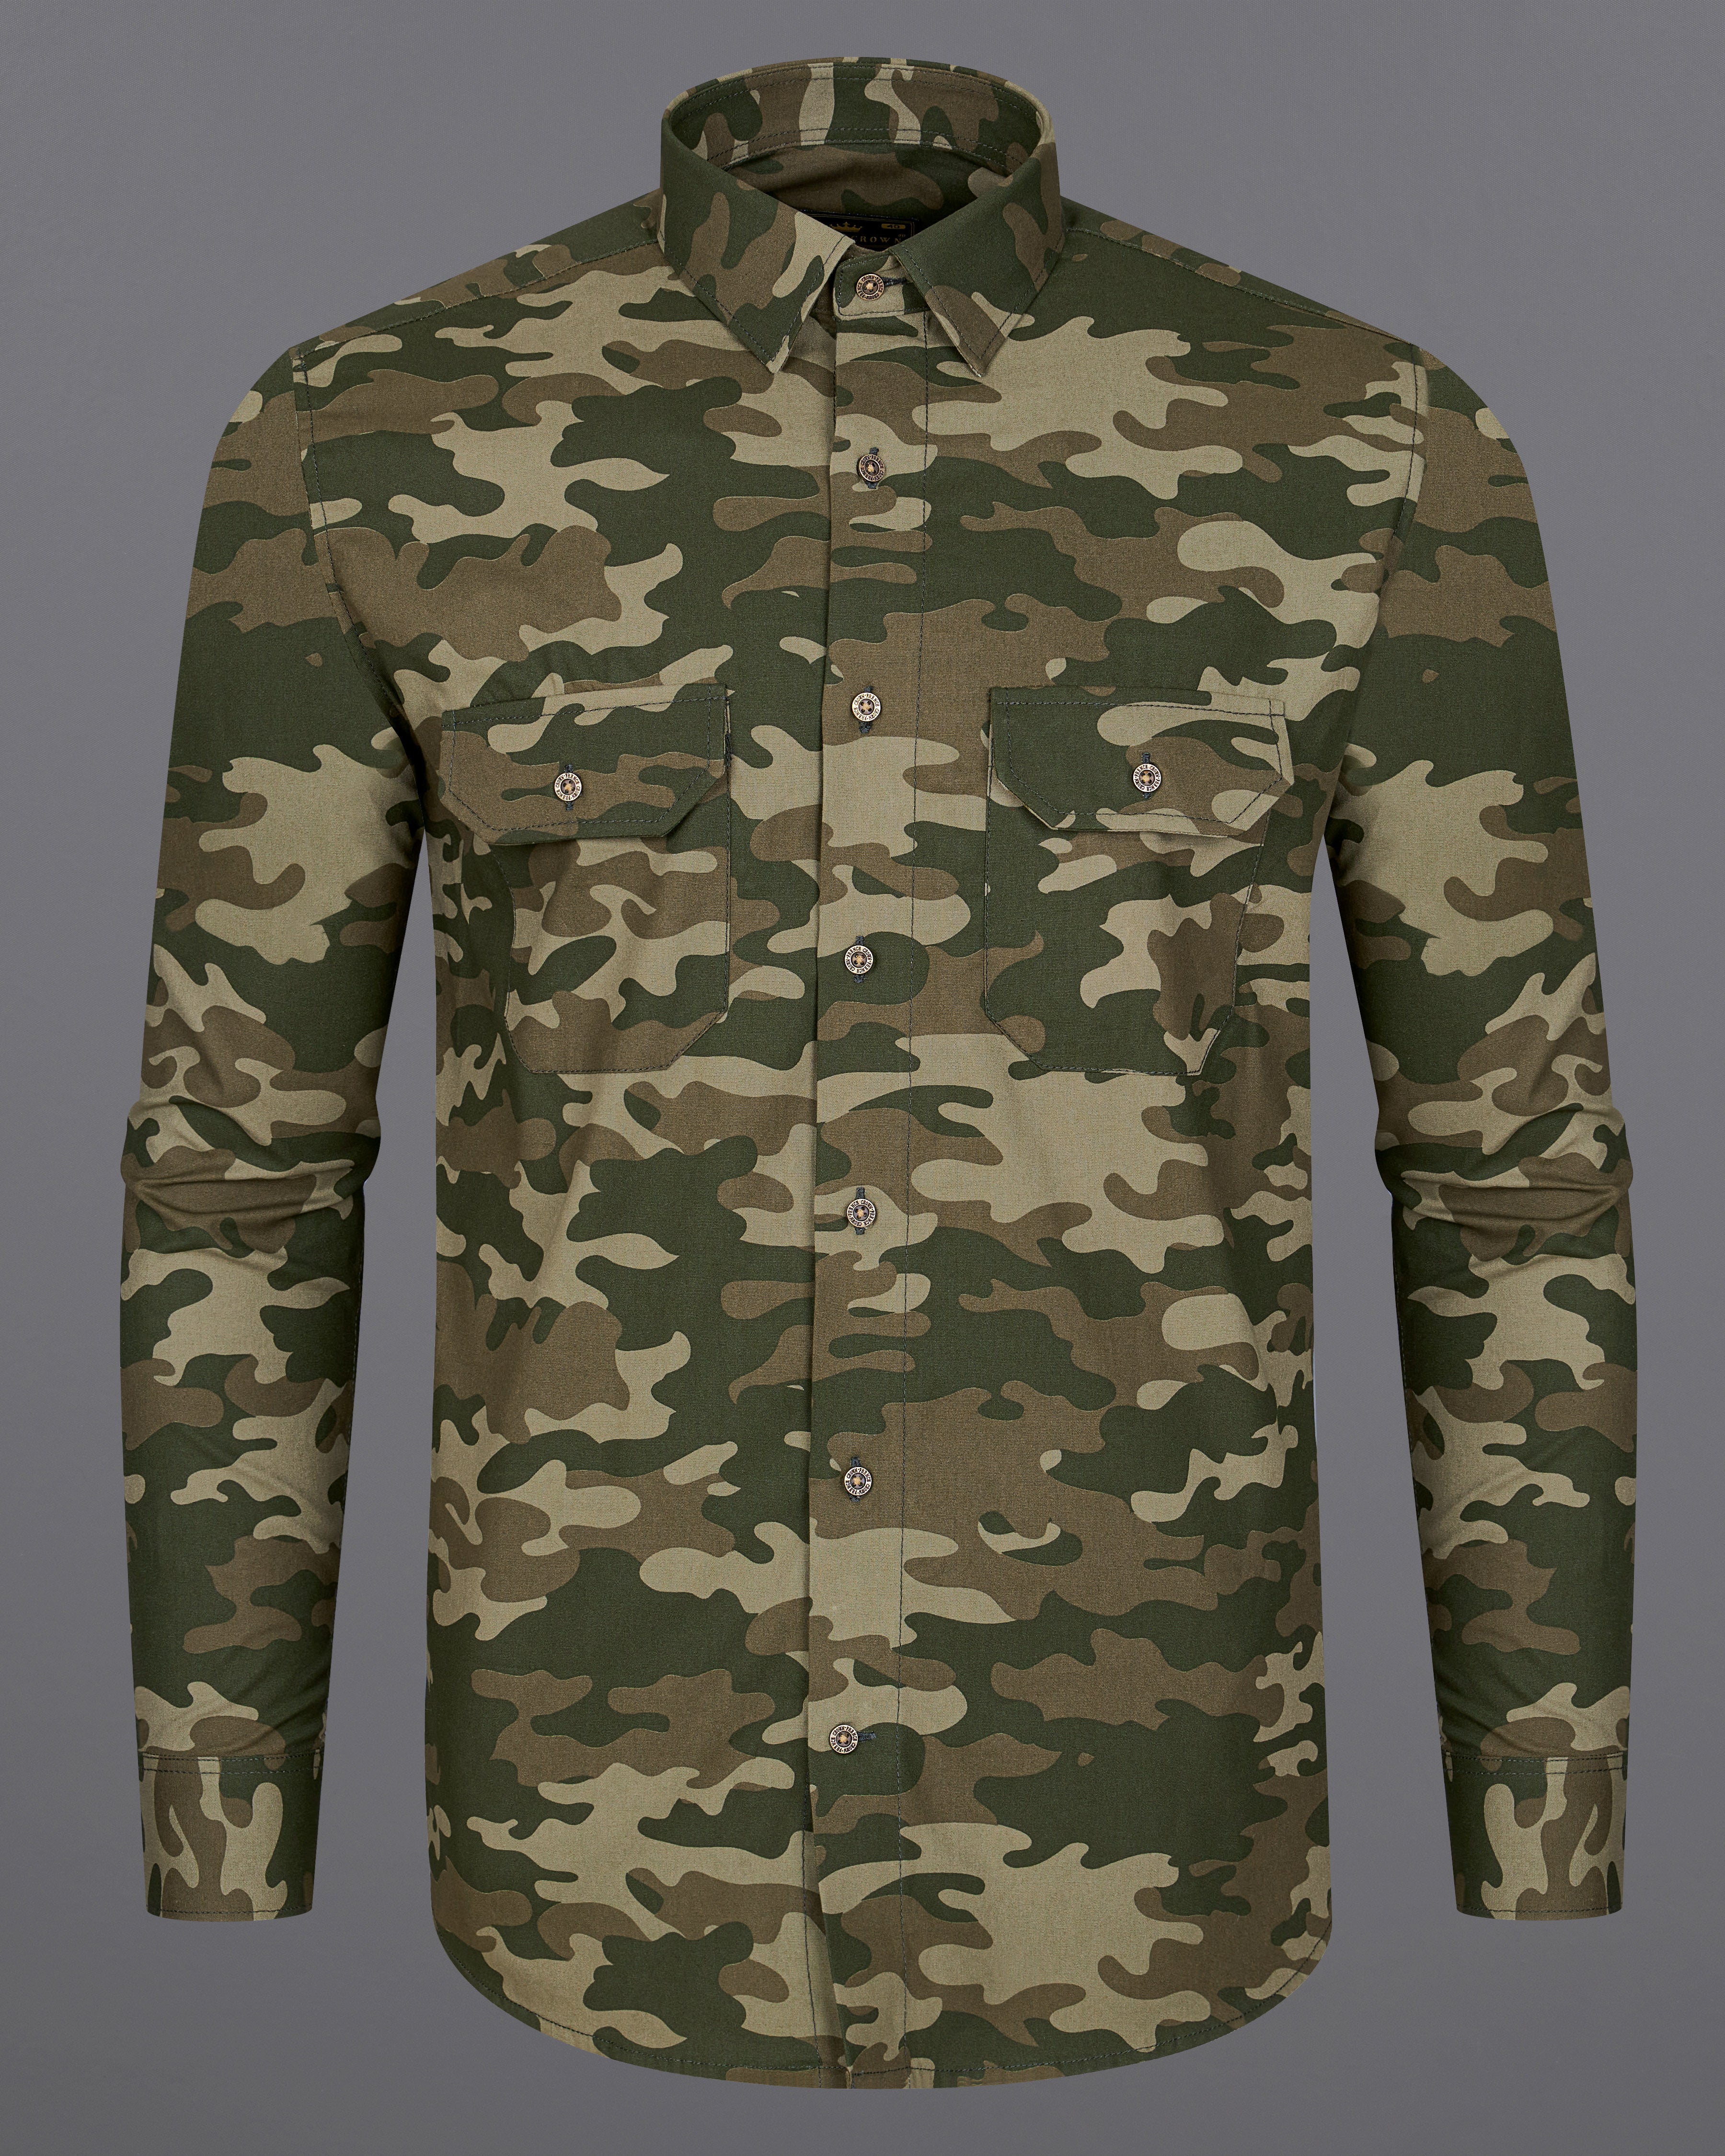 Wenge Brown with Charcoal Green Camouflage Printed Royal Oxford Designer Shirt 8899-MB-FP-38, 8899-MB-FP-H-38,  8899-MB-FP-39,  8899-MB-FP-H-39,  8899-MB-FP-40,  8899-MB-FP-H-40,  8899-MB-FP-42,  8899-MB-FP-H-42,  8899-MB-FP-44,  8899-MB-FP-H-44,  8899-MB-FP-46,  8899-MB-FP-H-46,  8899-MB-FP-48,  8899-MB-FP-H-48,  8899-MB-FP-50,  8899-MB-FP-H-50,  8899-MB-FP-52,  8899-MB-FP-H-52